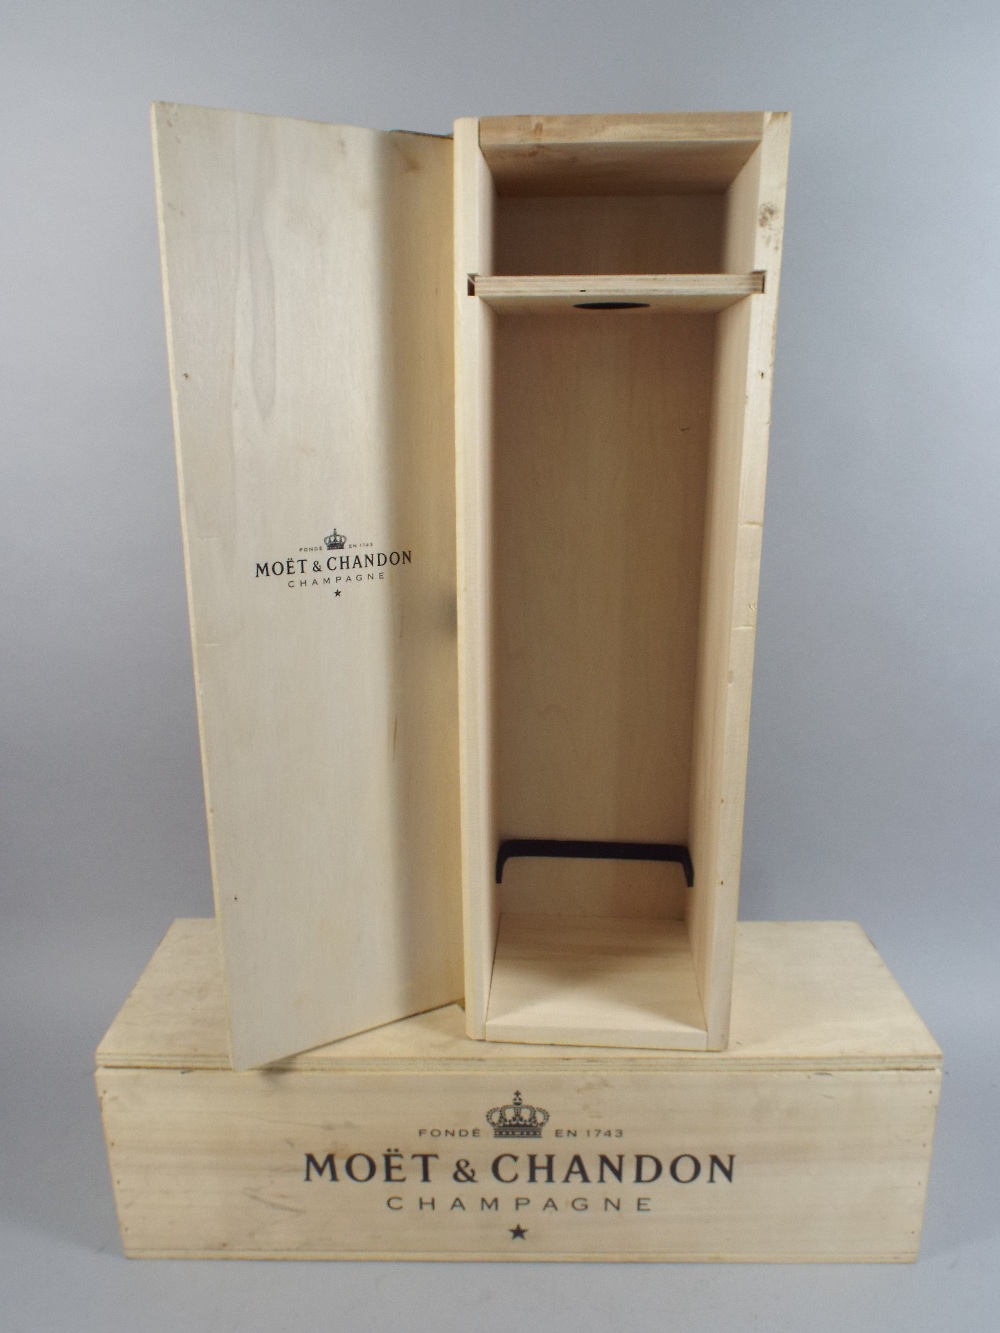 Two Moet and Chandon Wooden Champagne Boxes.